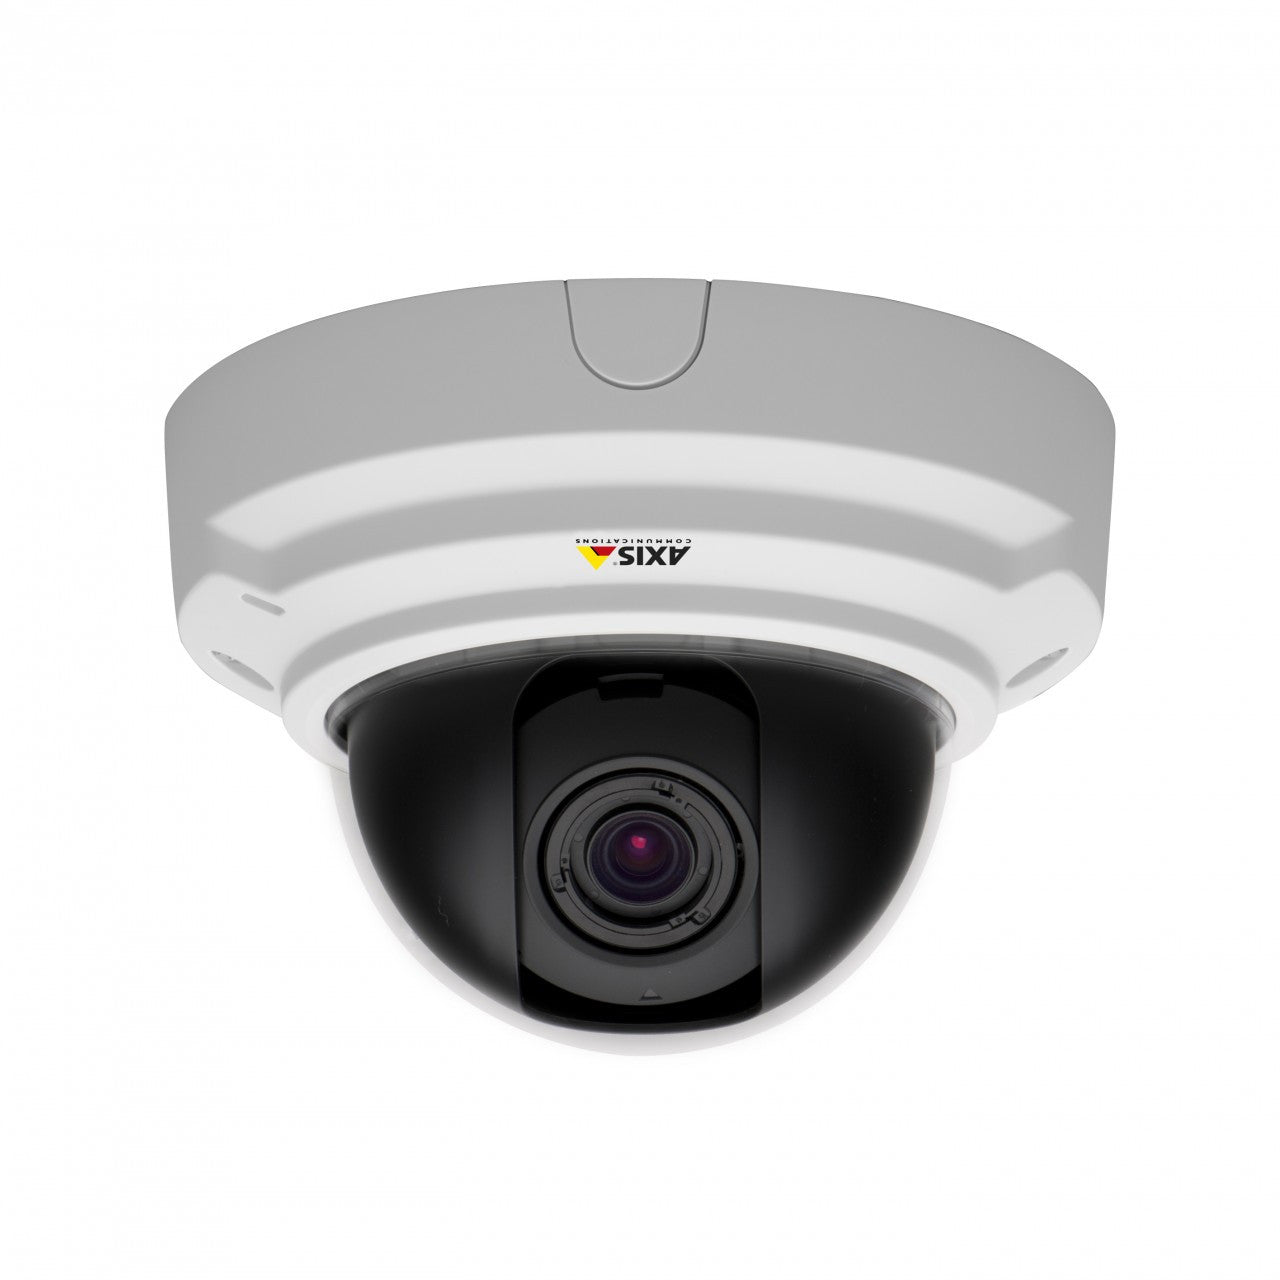 AXIS P3353 (0464-001) Indoor Dome Network Camera